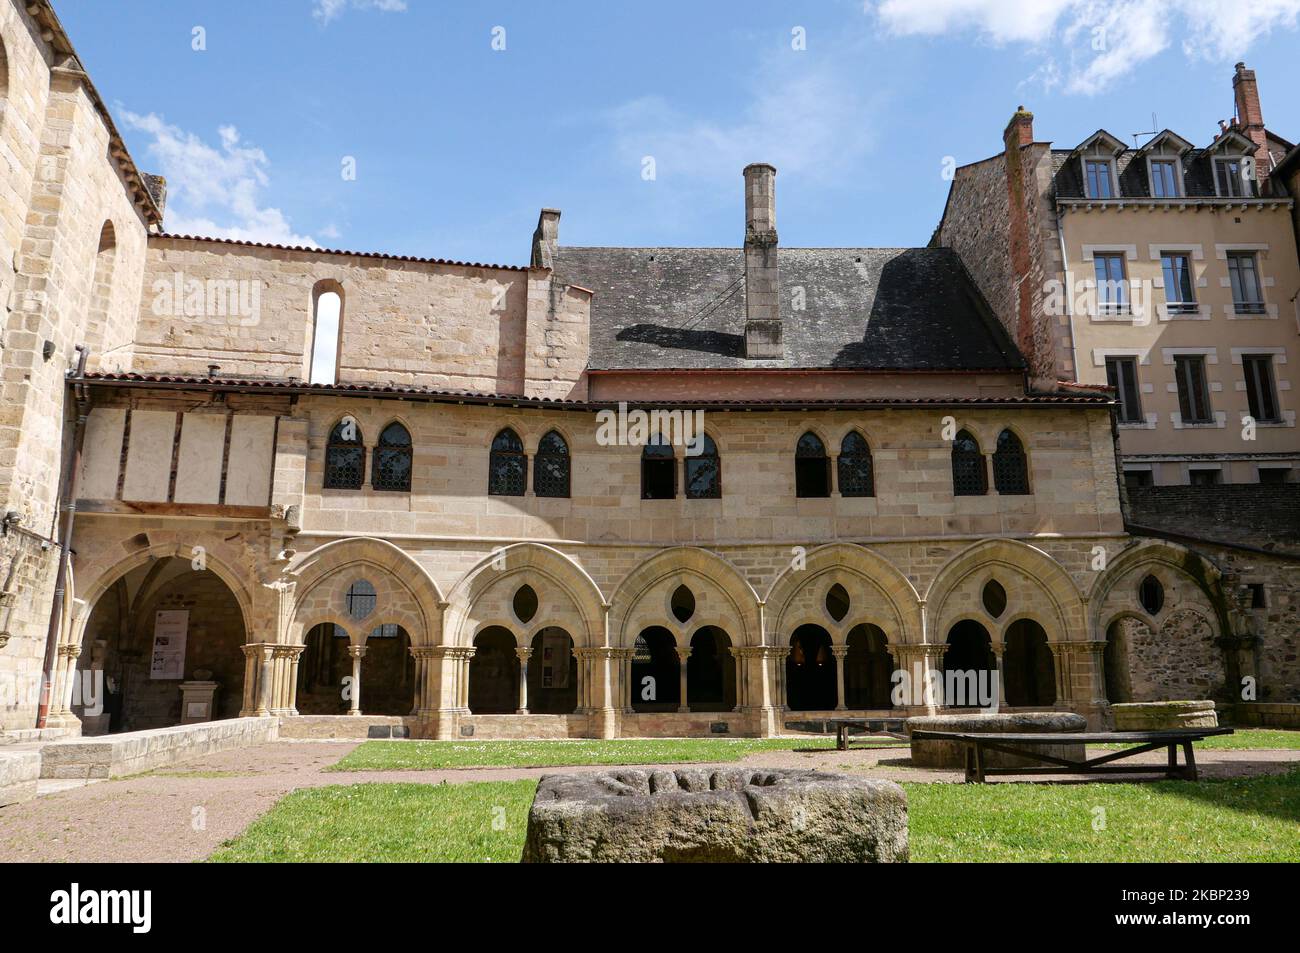 Tulle (central southern France): the cloister of the Notre Dame Cathedral, mainly built in the 13th century, houses the Museum of regional Arts and Po Stock Photo